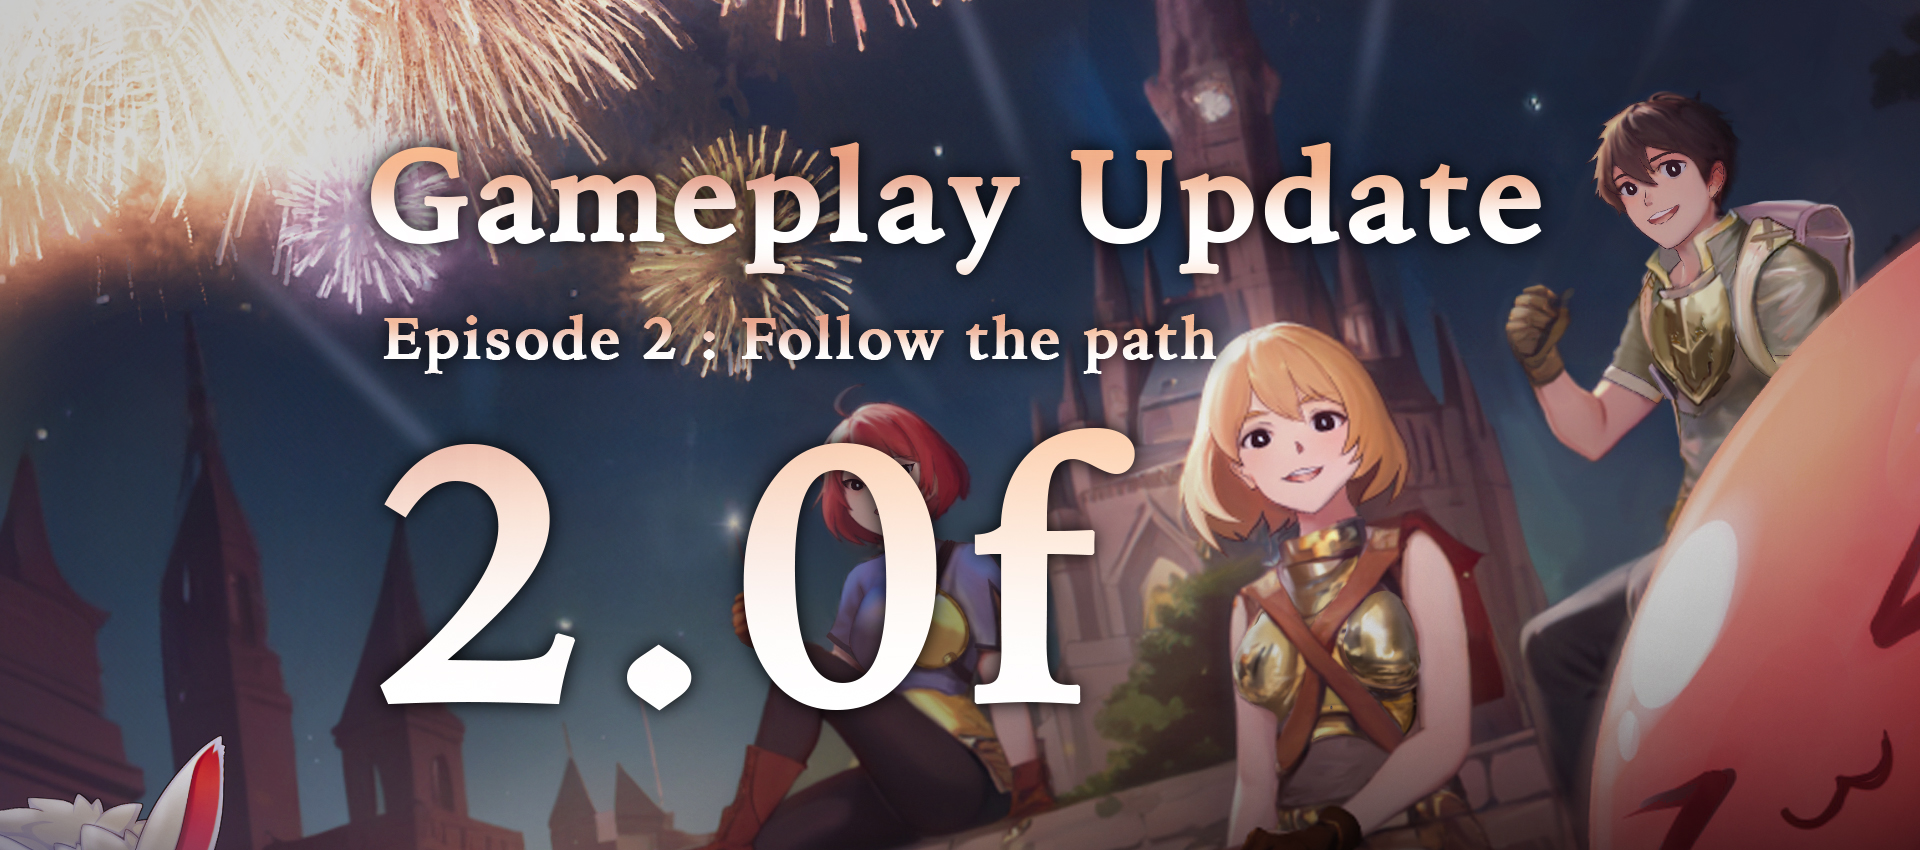 Gameplay Update 2.0f : Follow the path